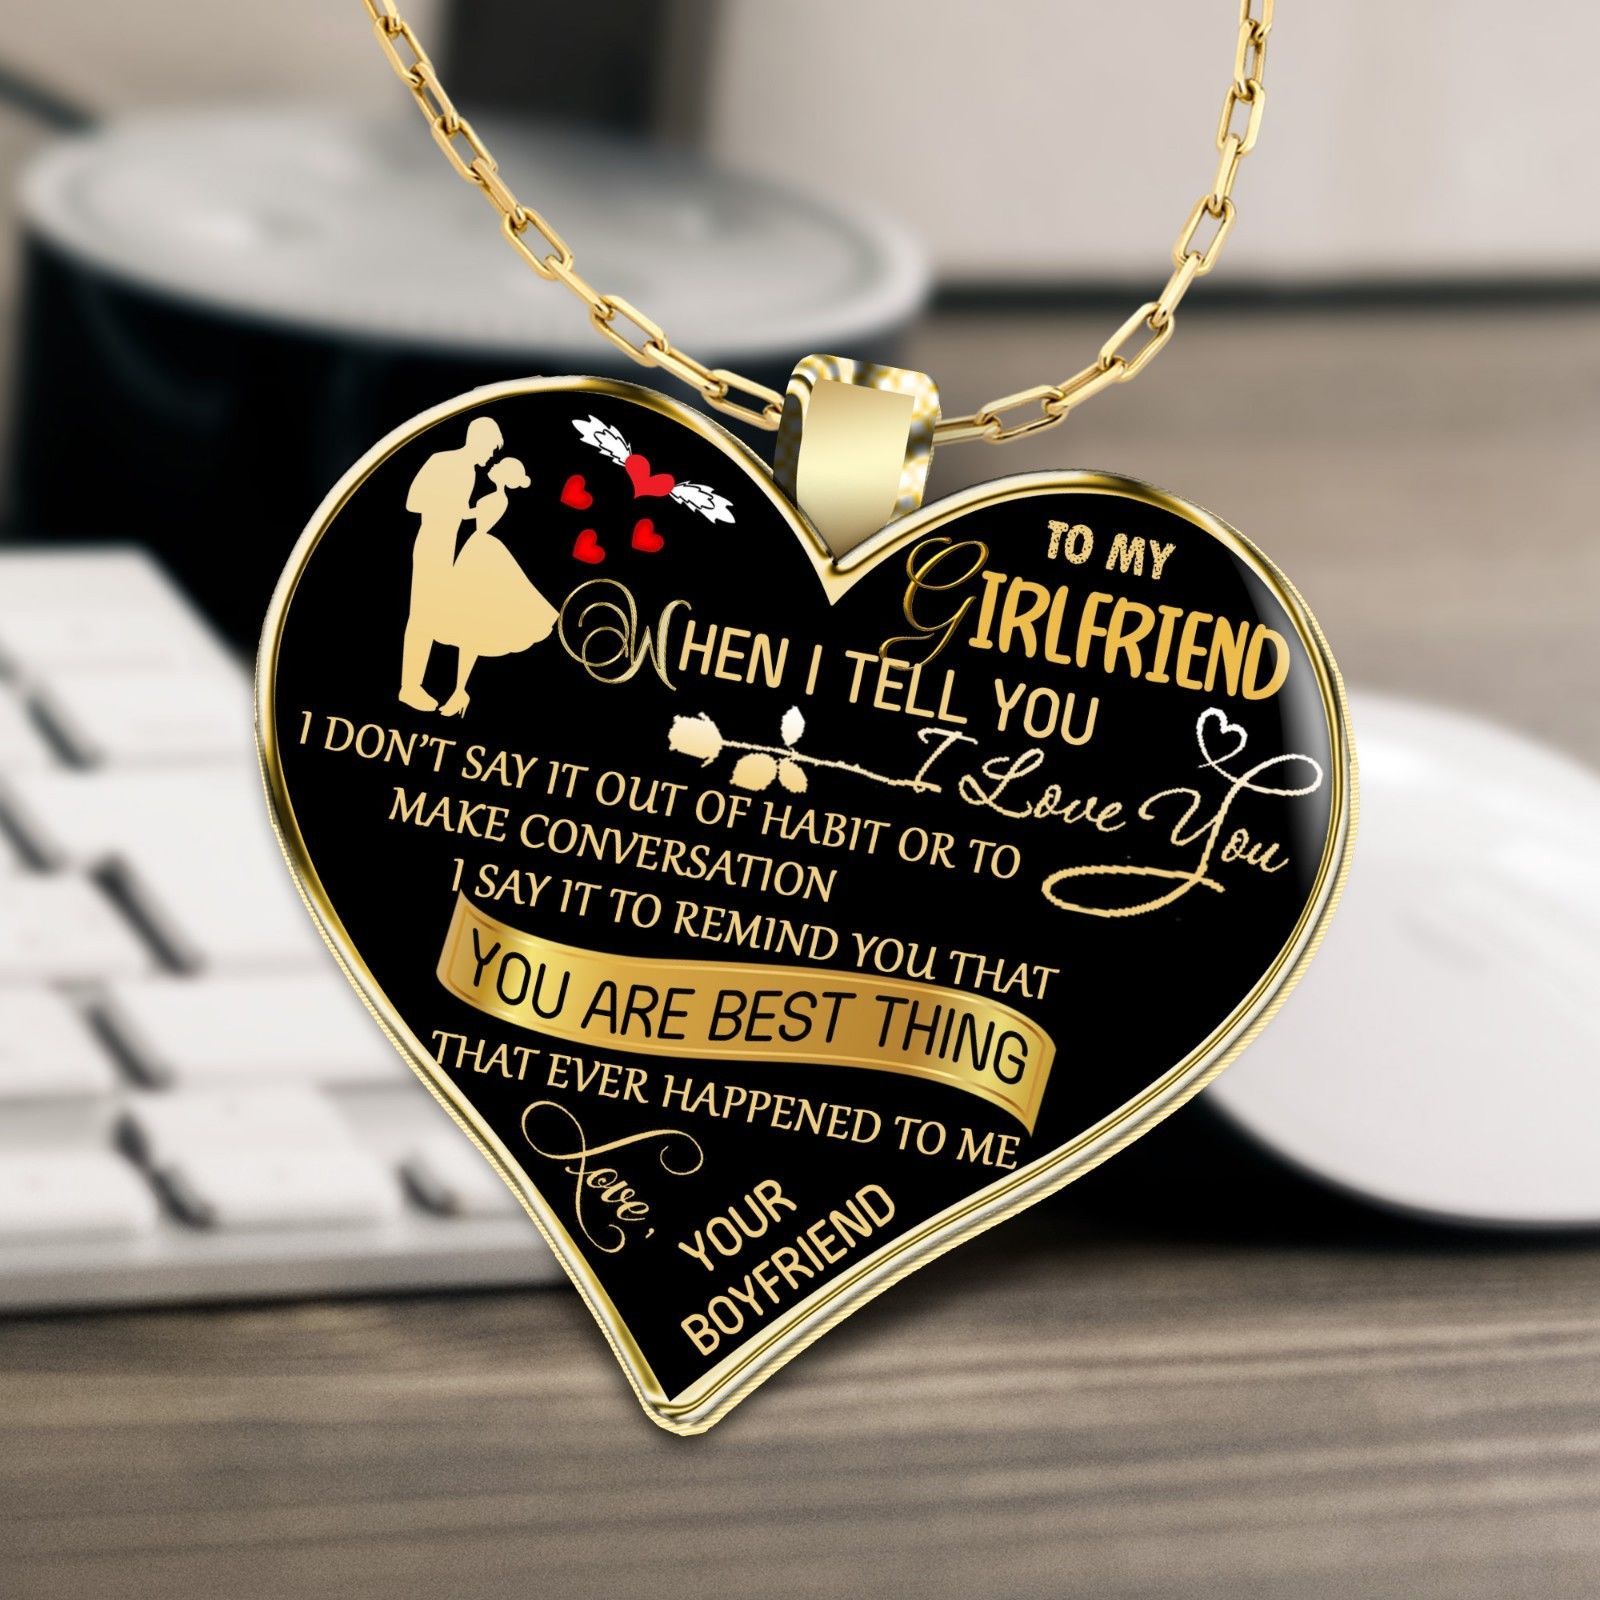 Girlfriend necklace: You are best thing that ever happened to me - $25.95